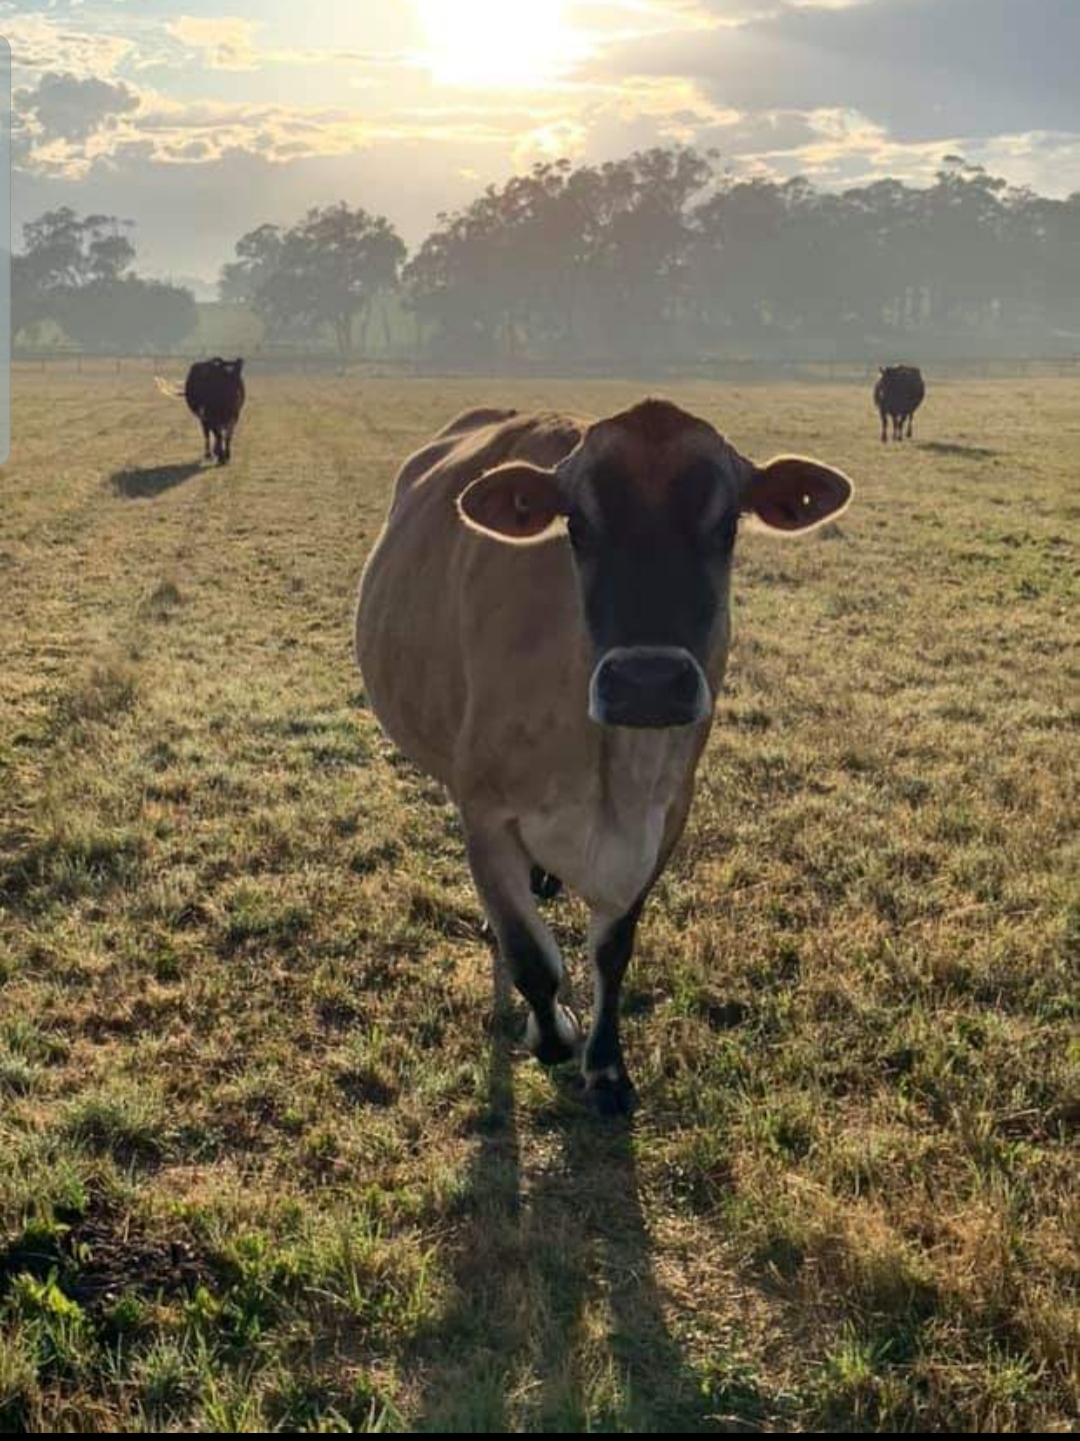 Photo of a cow in a field with two cows in the distance.